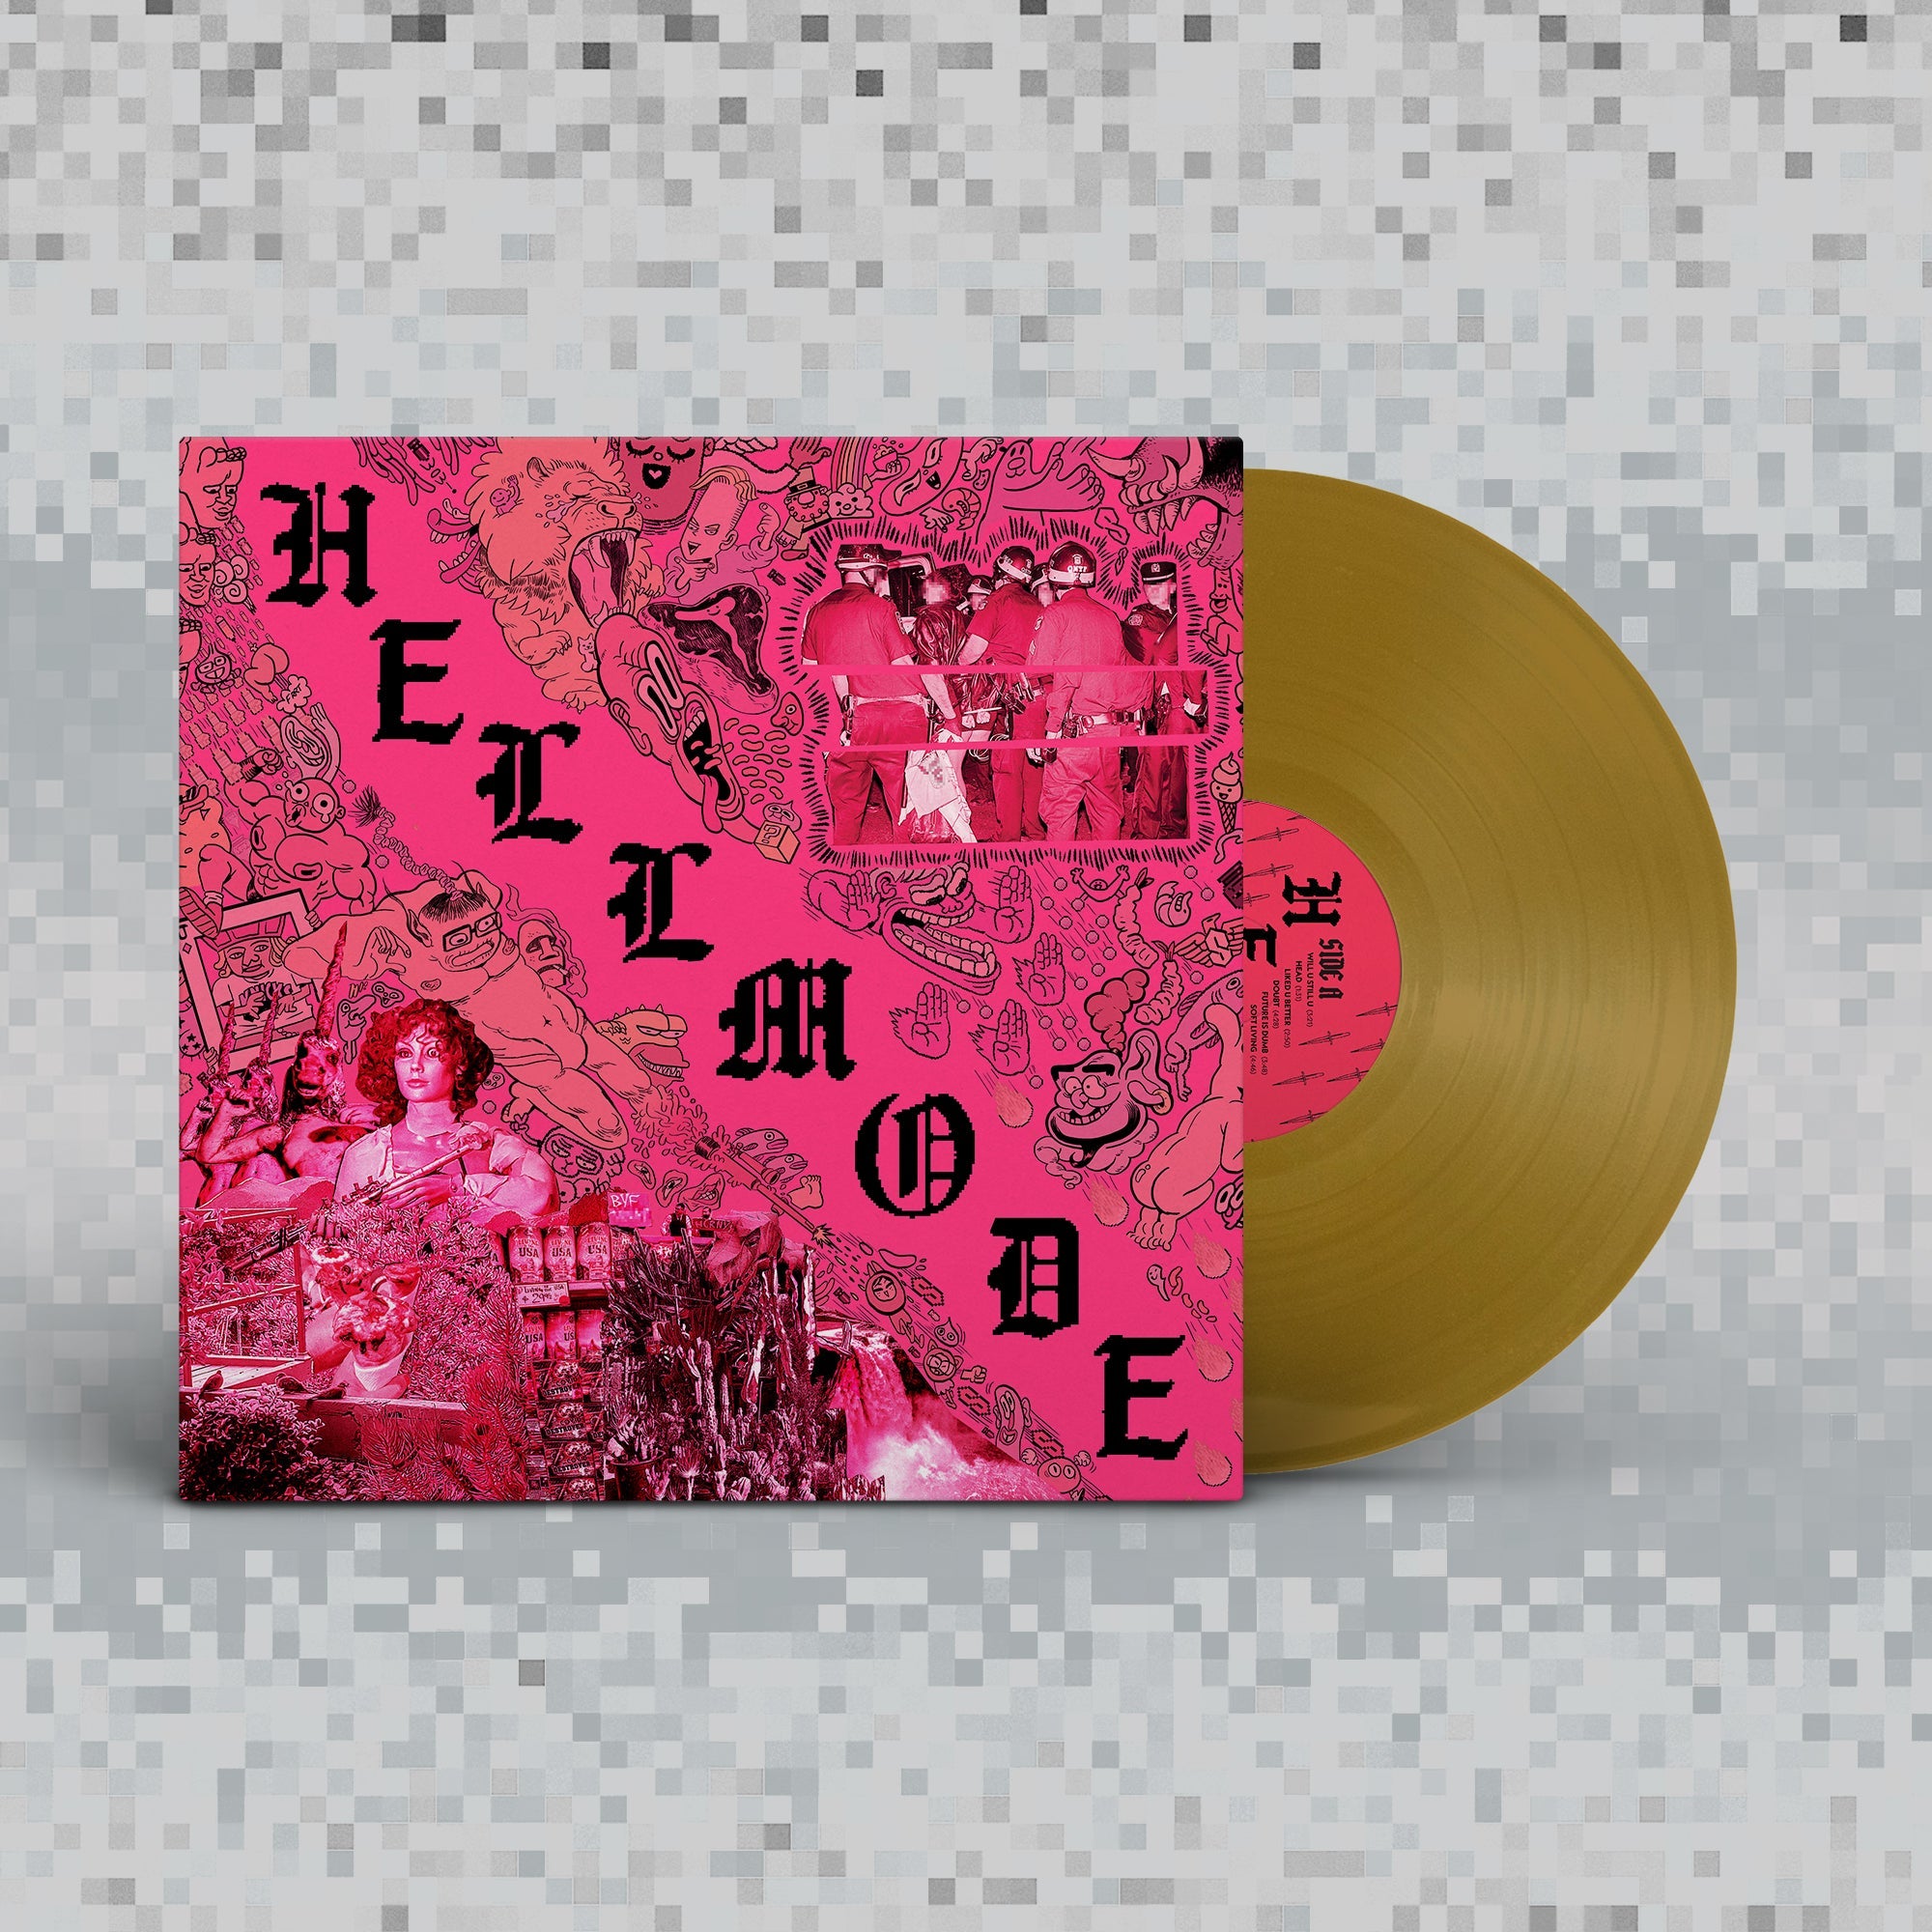 JEFF ROSENSTOCK 'HELLMODE' LP (Limited Edition – Only 350 Made, Opaque Gold Vinyl)